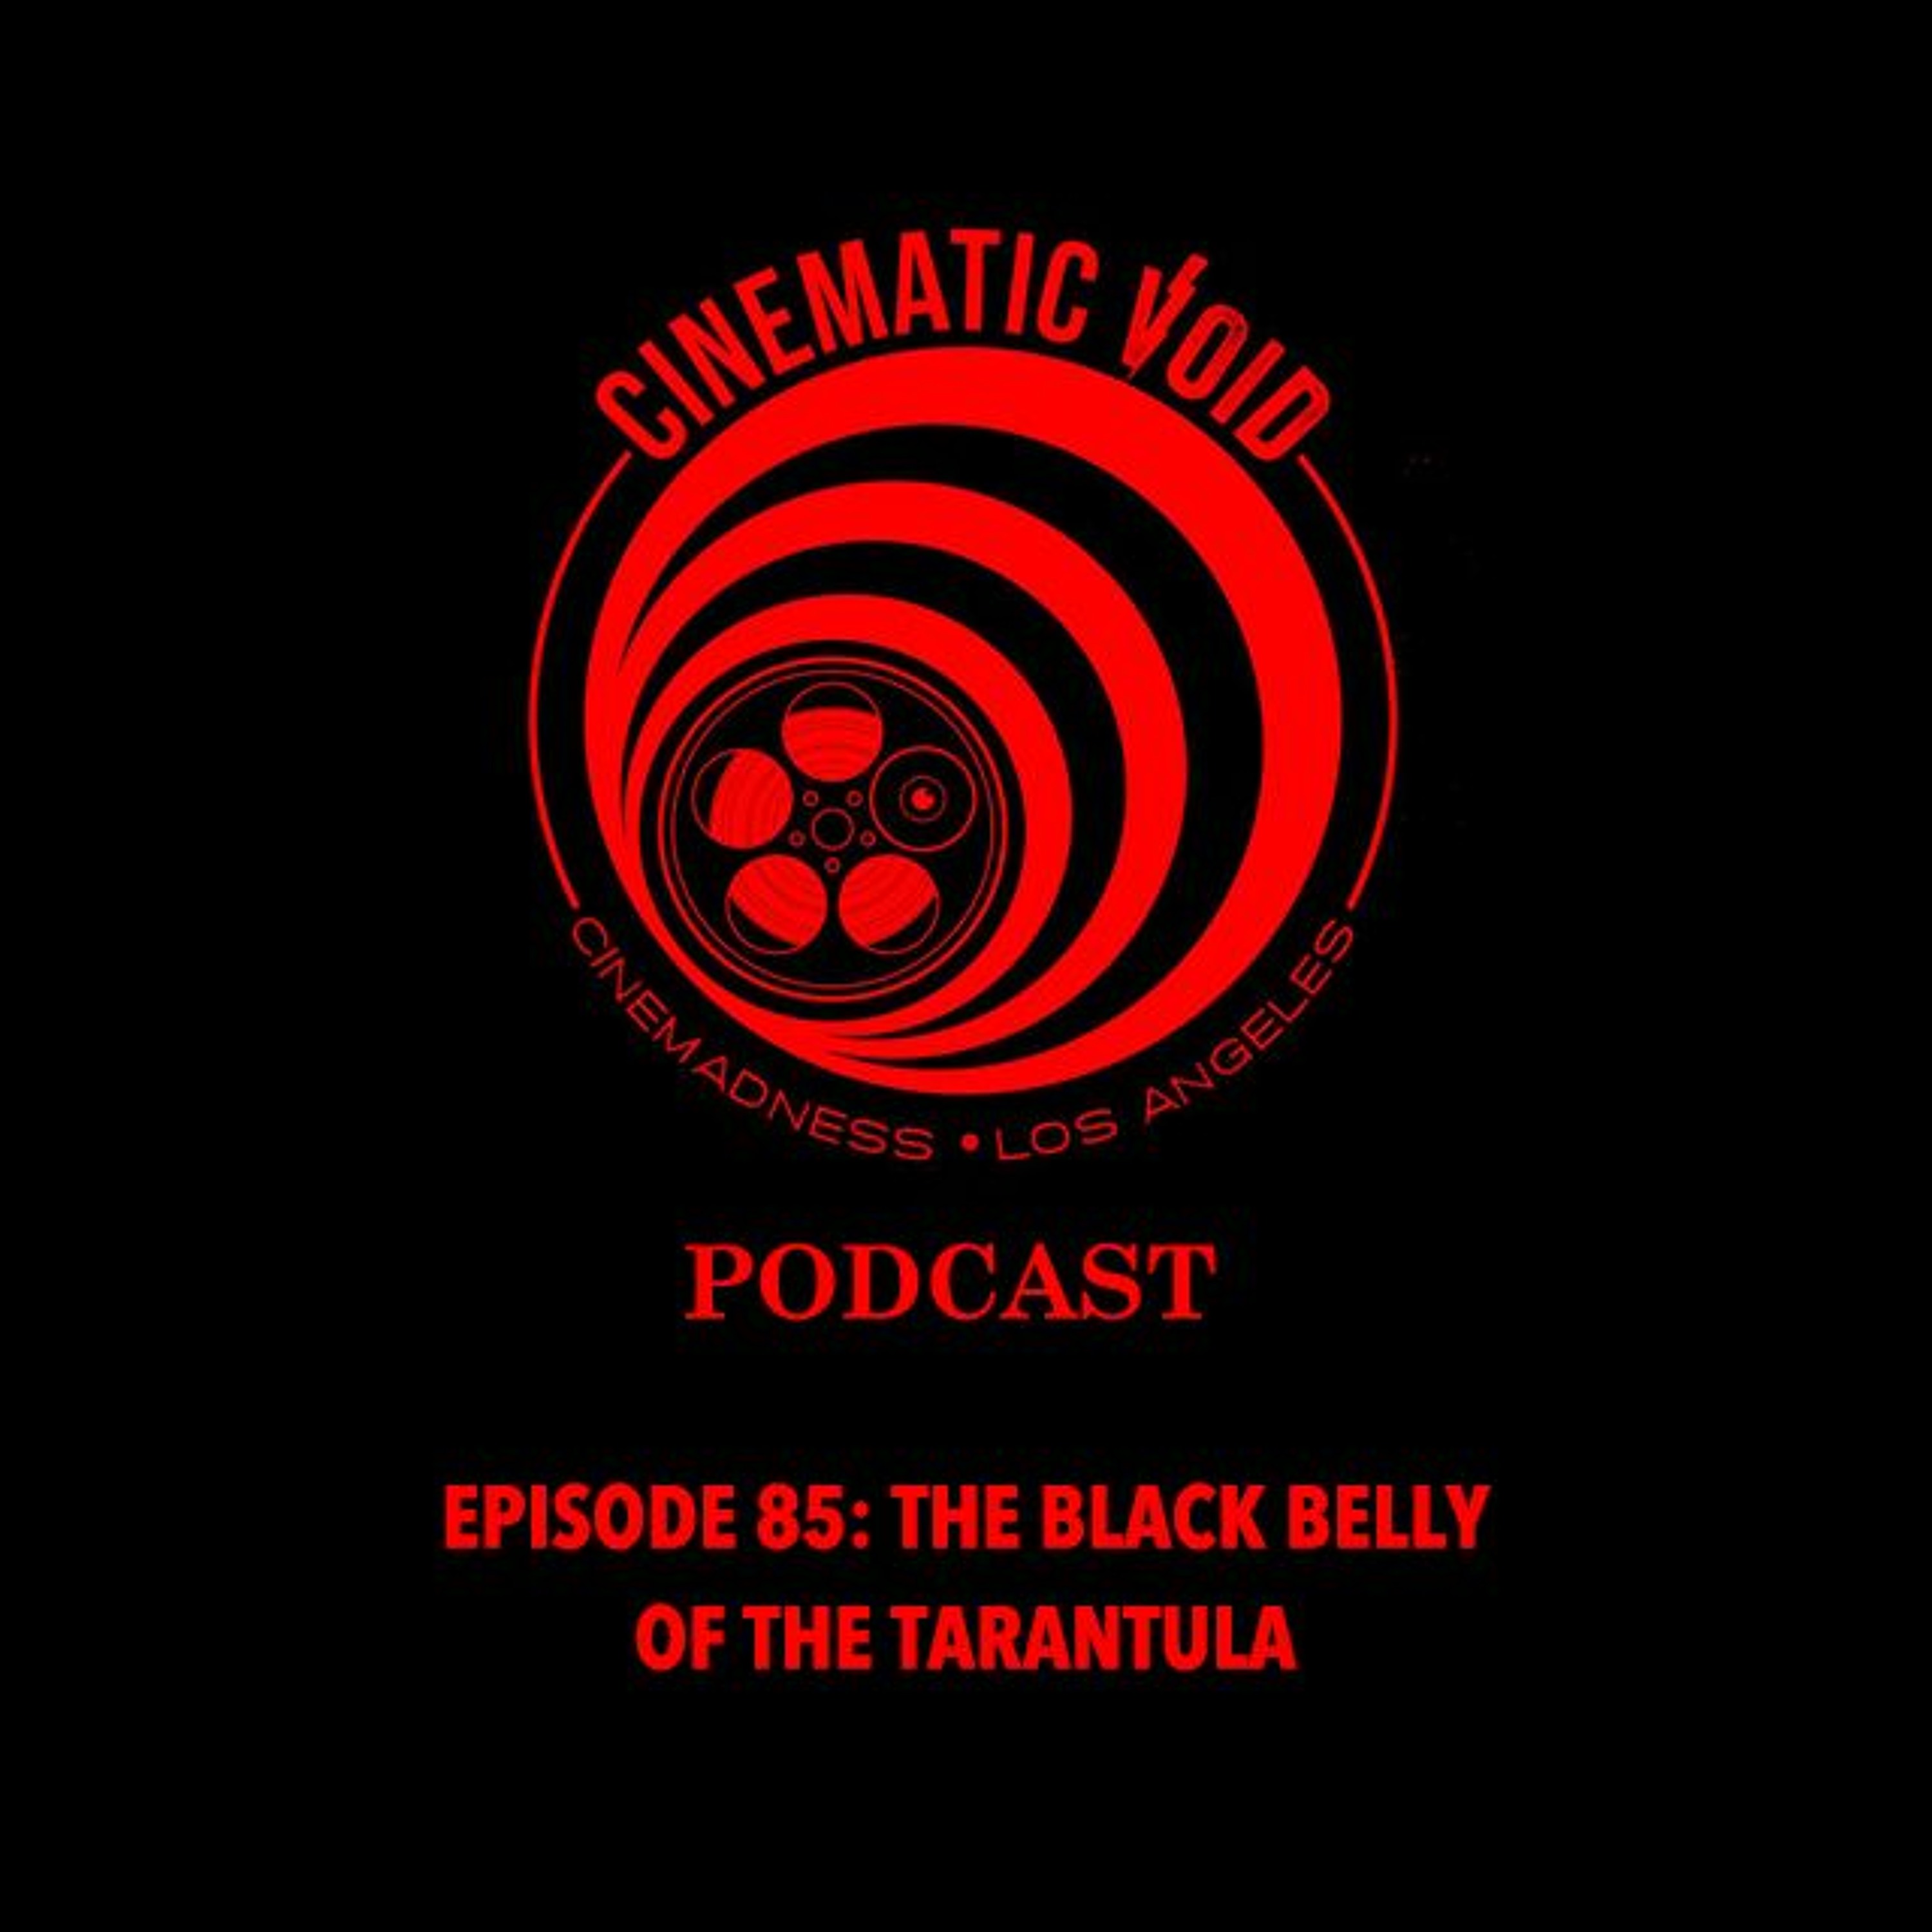 Episode 85: THE BLACK BELLY OF THE TARANTULA